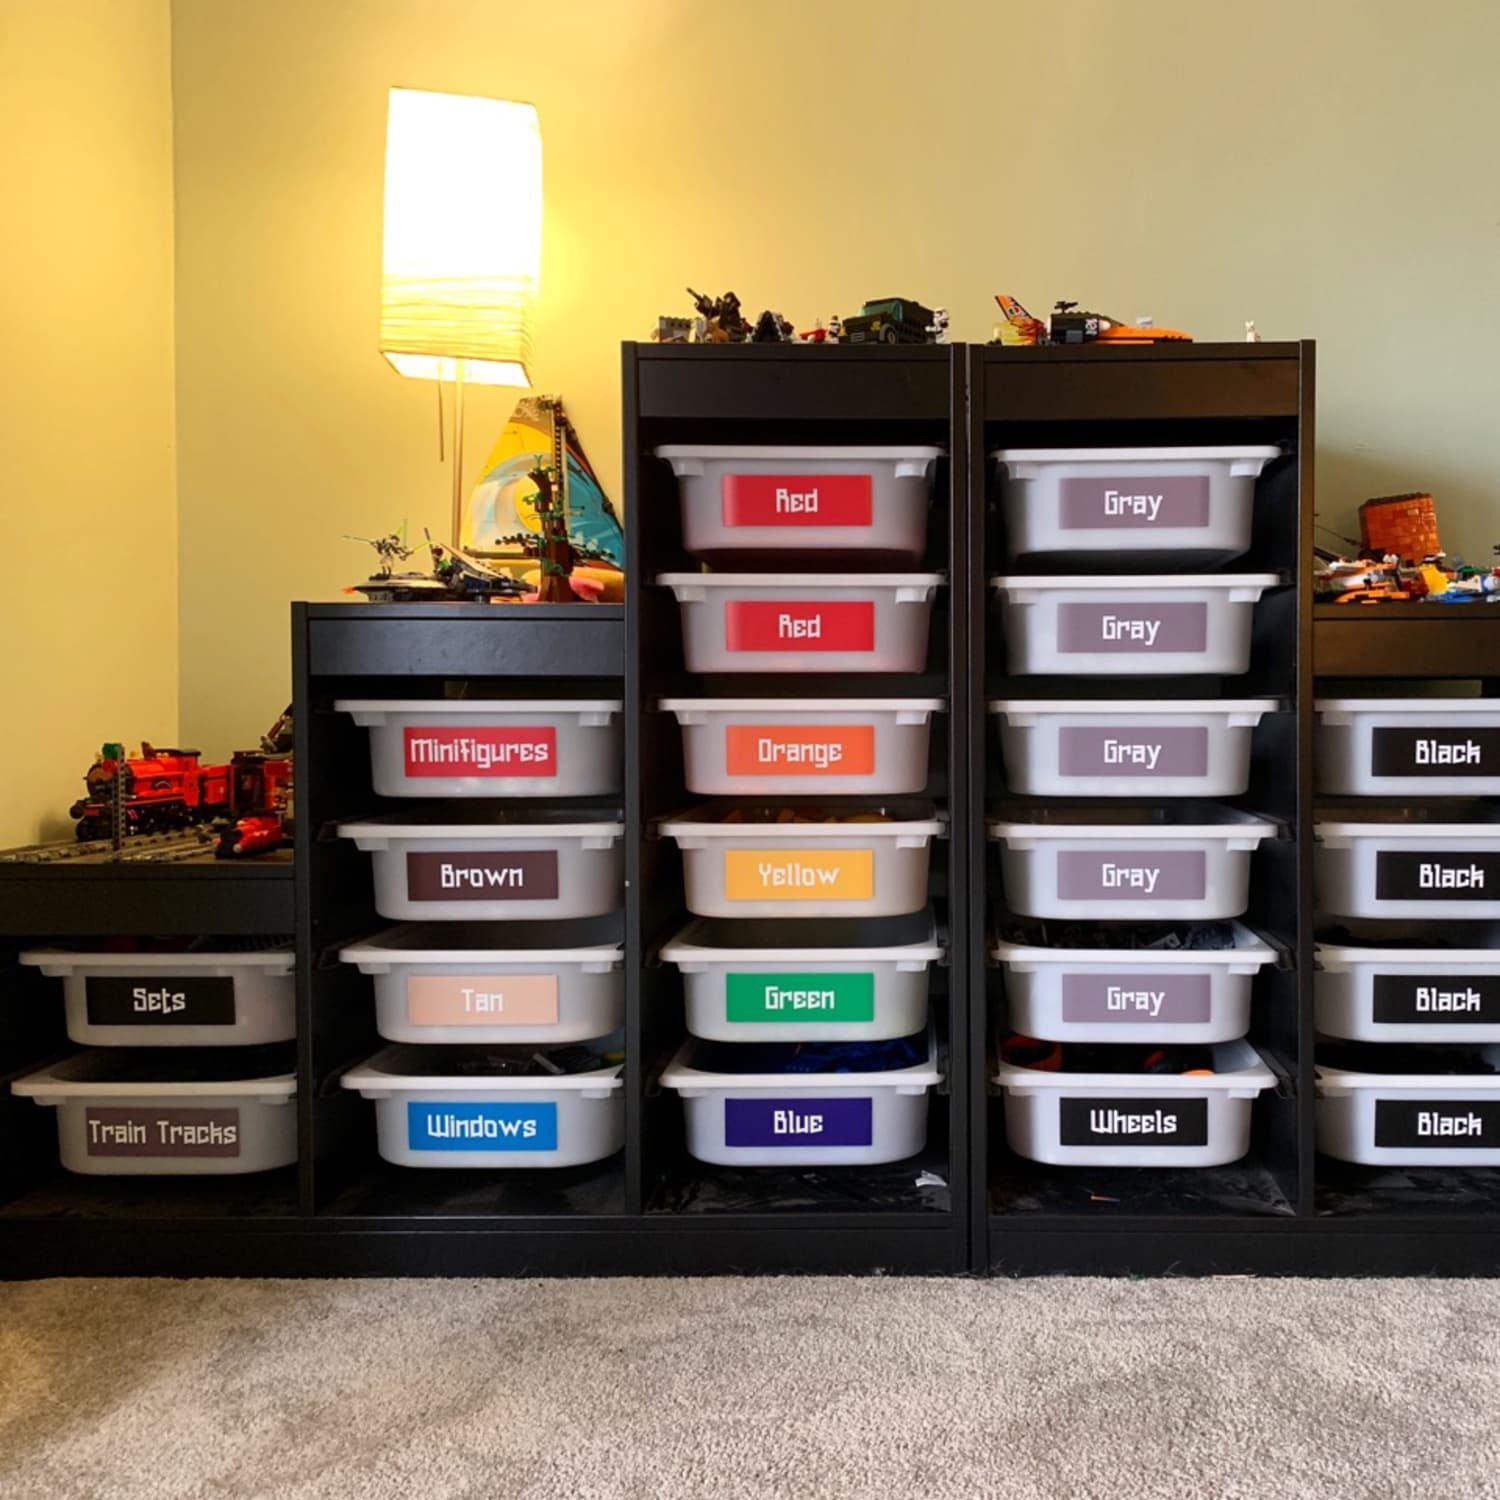 Lego Storage Tips, Ideas & Solutions For Organizing Your Lego